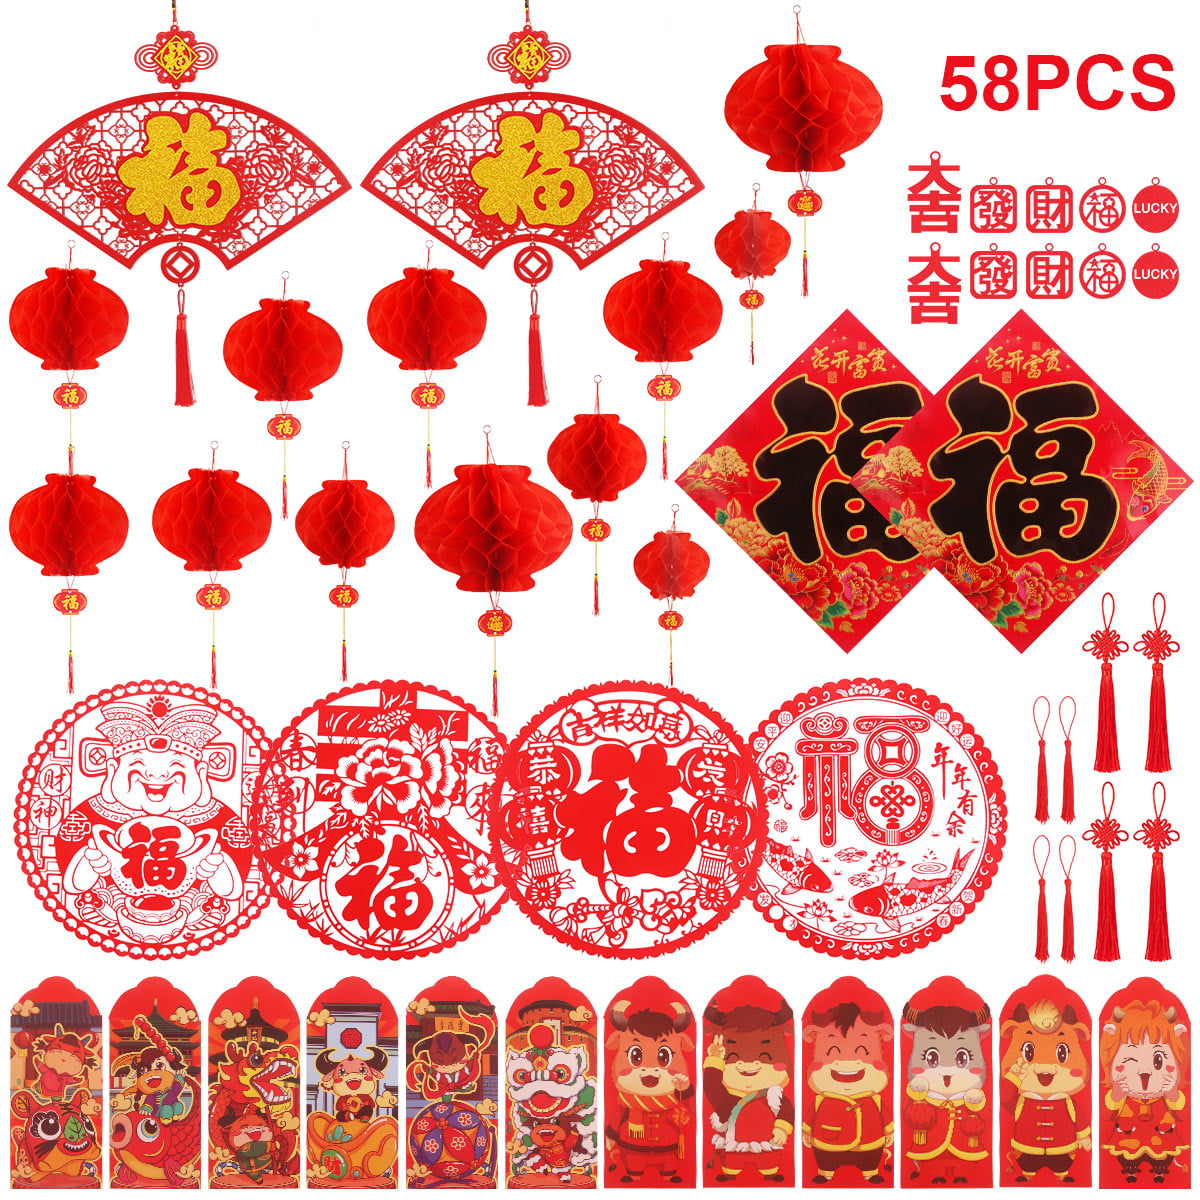 45 Pieces Chinese New Year Decor Kit Chinese Couplets Chinese Red Envelopes Hong Bao Fu Character Paper Cut Red Lantern Spring Festival Supplies Party Decoration 